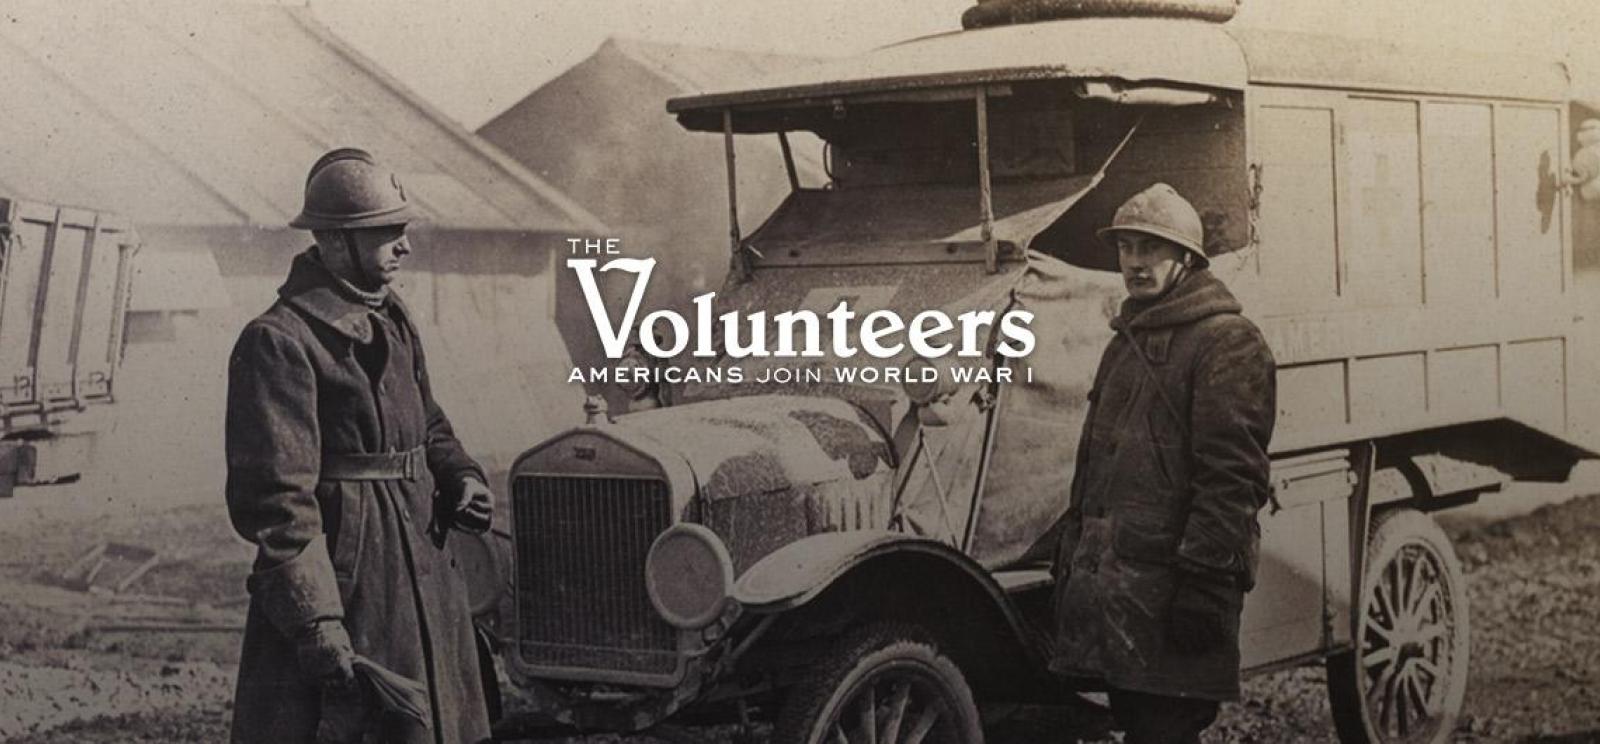 Image: two men dressed in thick overcoats and steel helmets stand next to a WWI-era truck. Text: The Volunteers. Americans Join World War I.